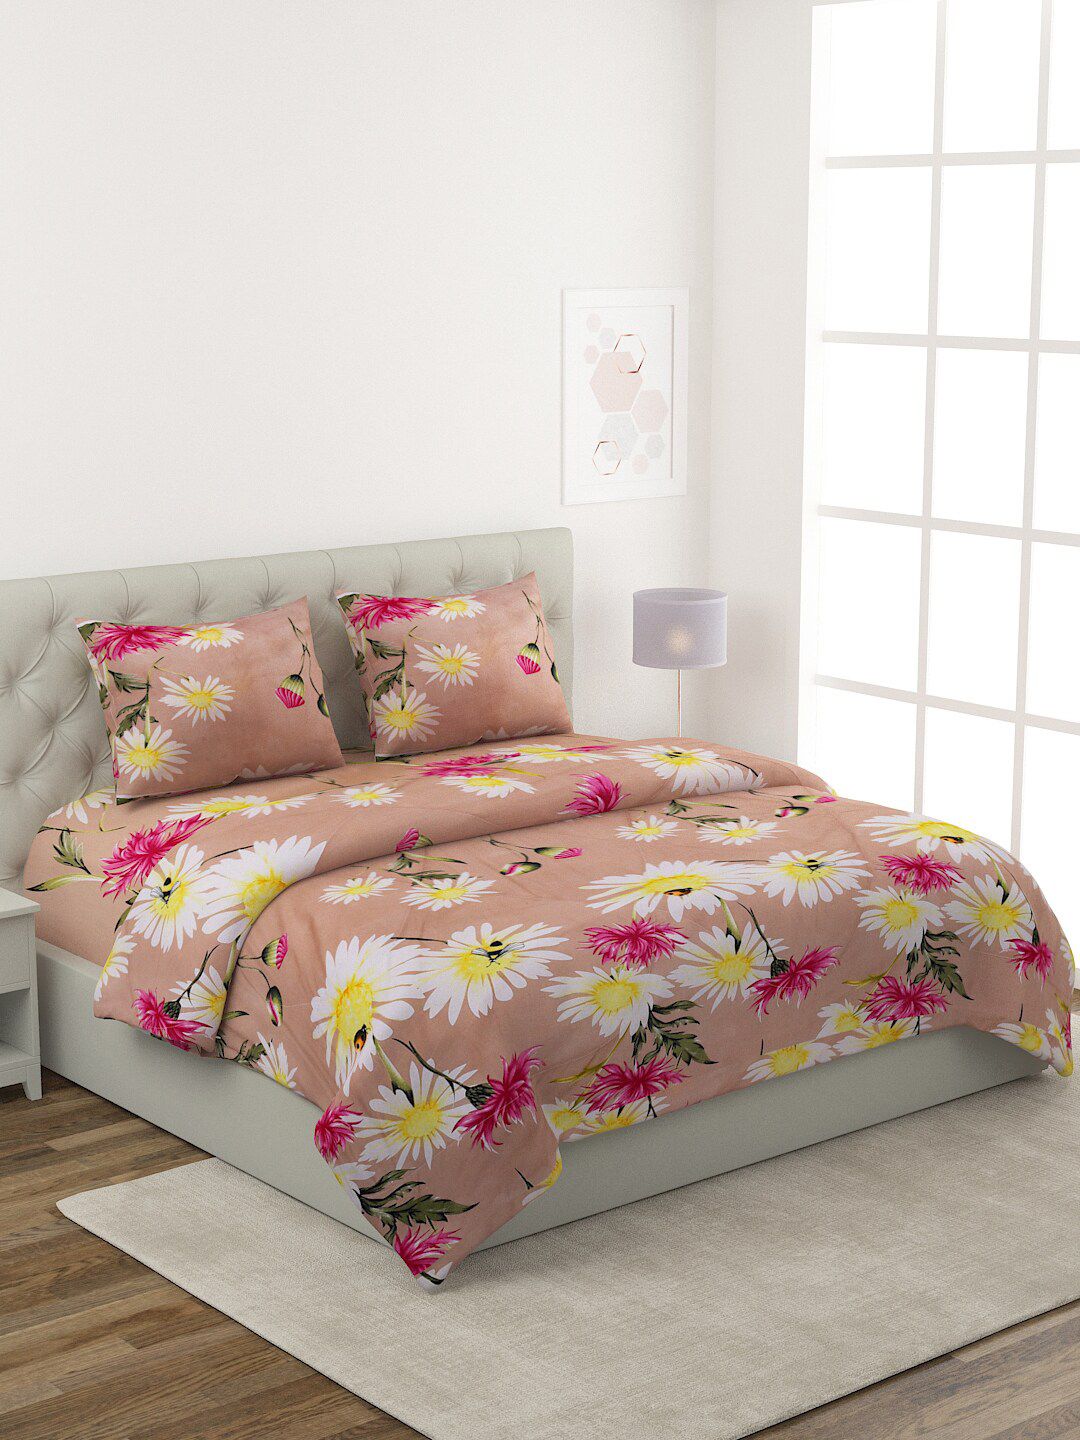 ROMEE Beige & White Floral Printed Pure Cotton Double King Bedding Set Price in India